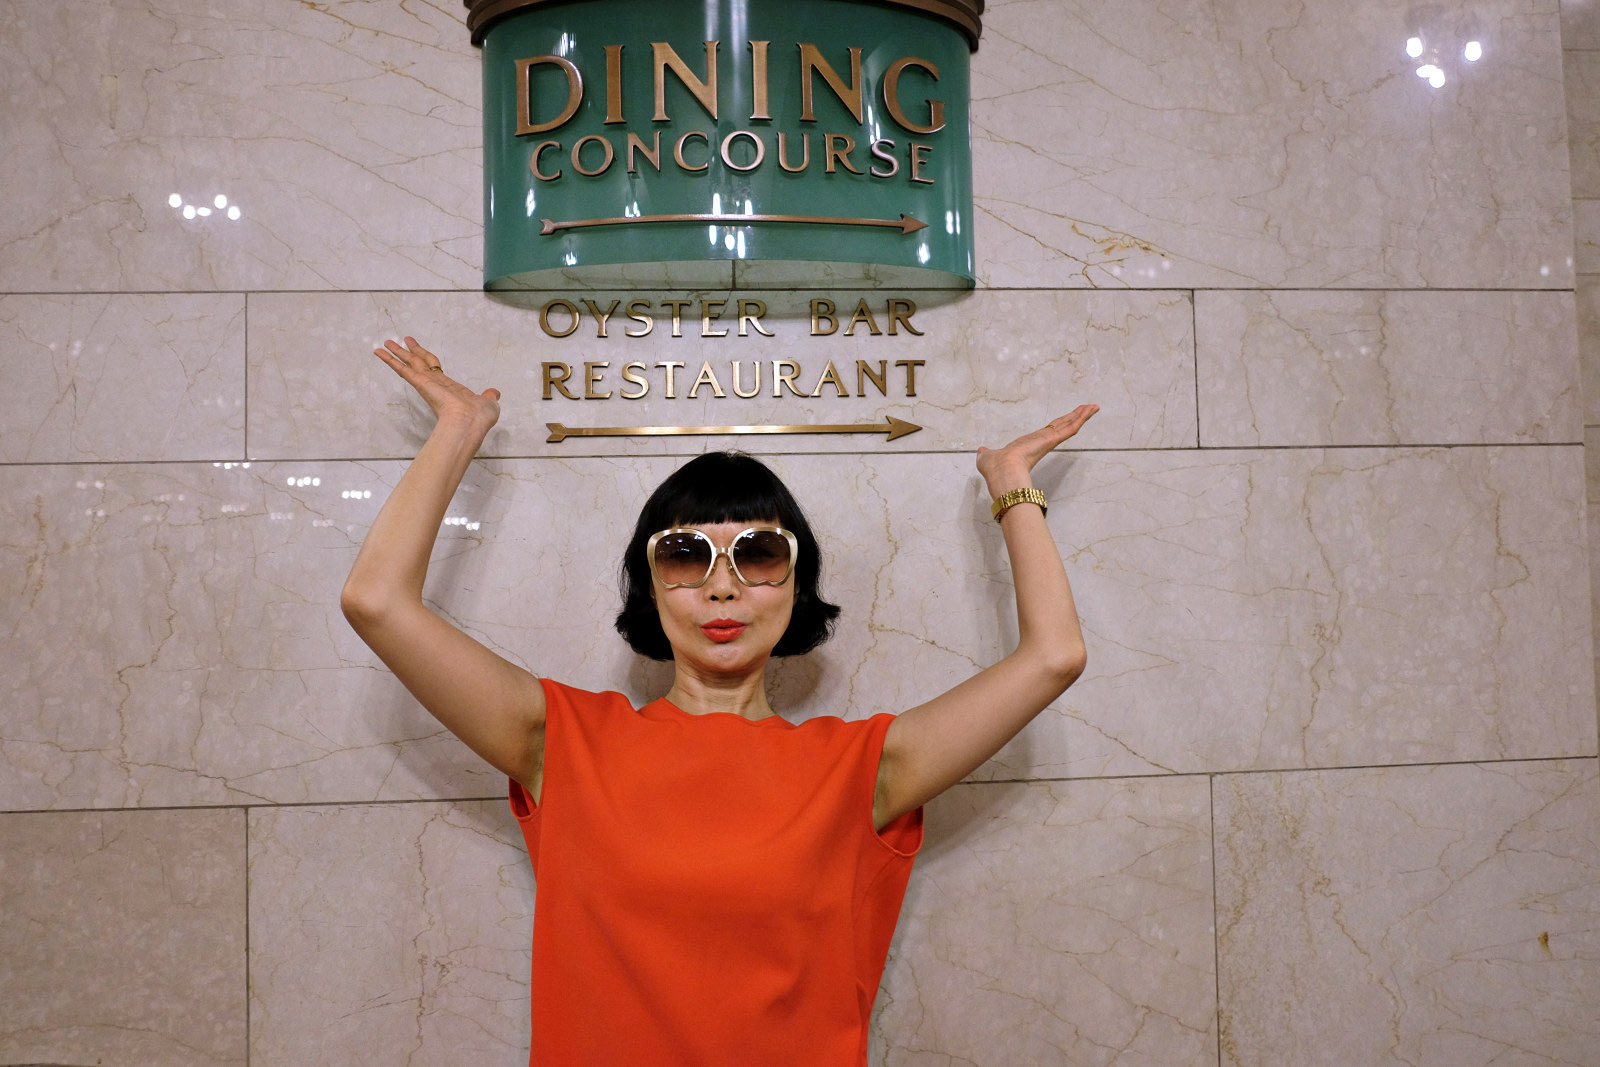 Vivienne poses under the Oyster Bar Seafood Restaurant sign, Grand Central Terminal, New York City